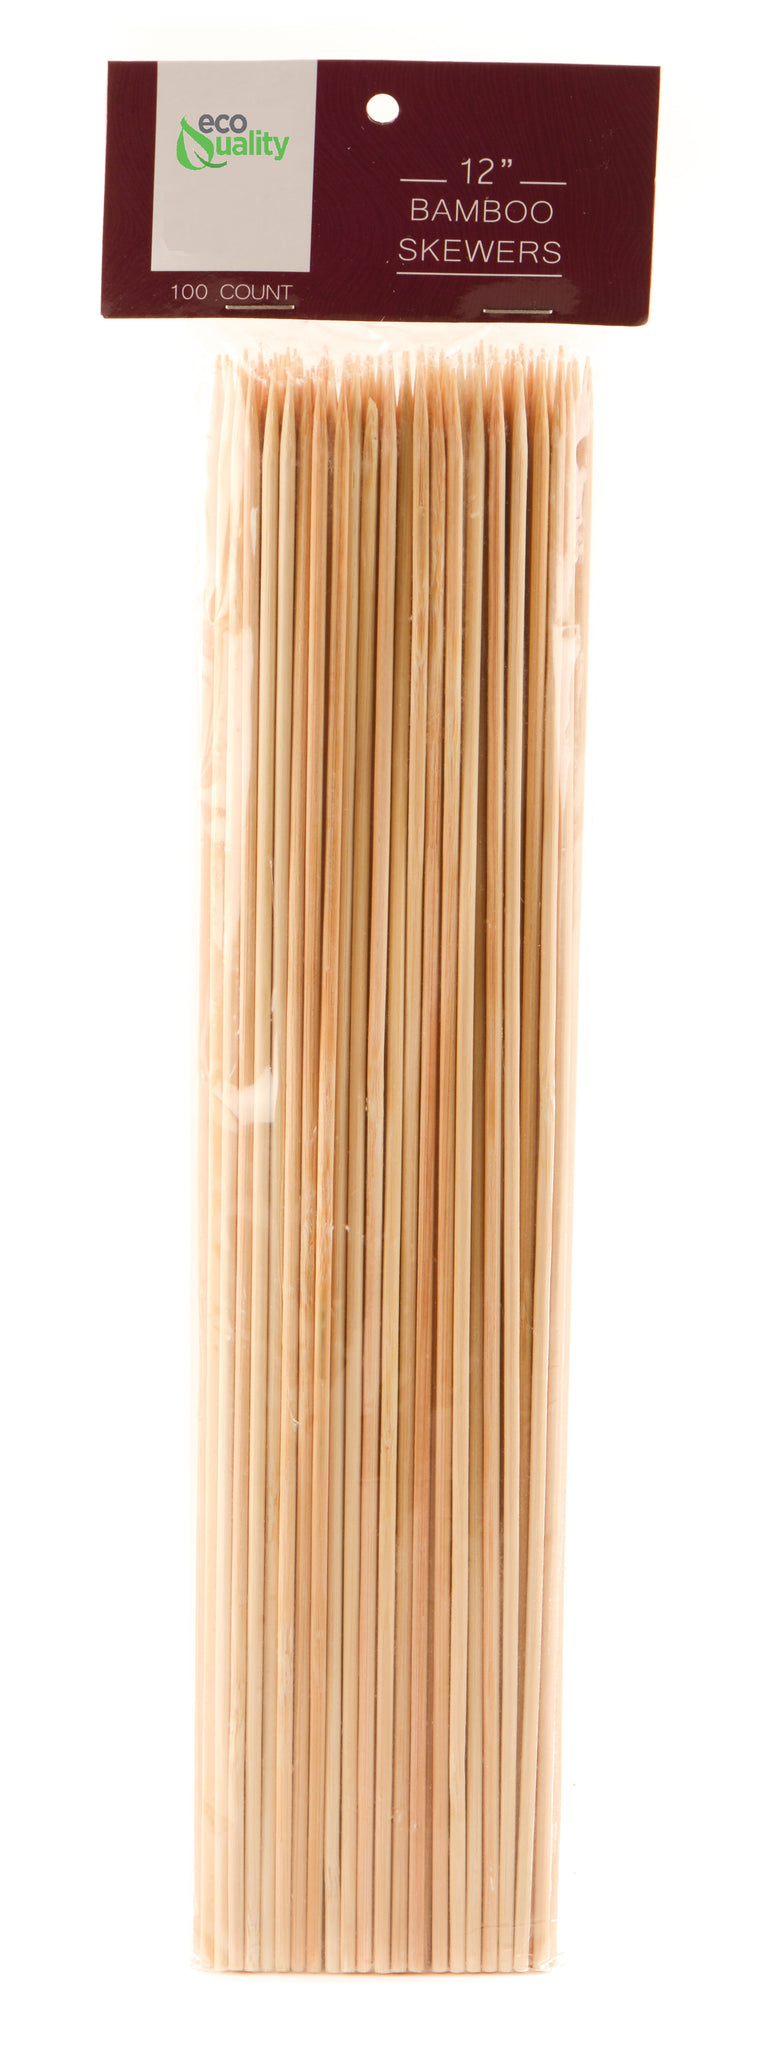 12 Inch Bamboo Skewers - Biodegradable, Sturdy, Eco-Friendly, Reusable, Great for BBQ, Grilling and more!